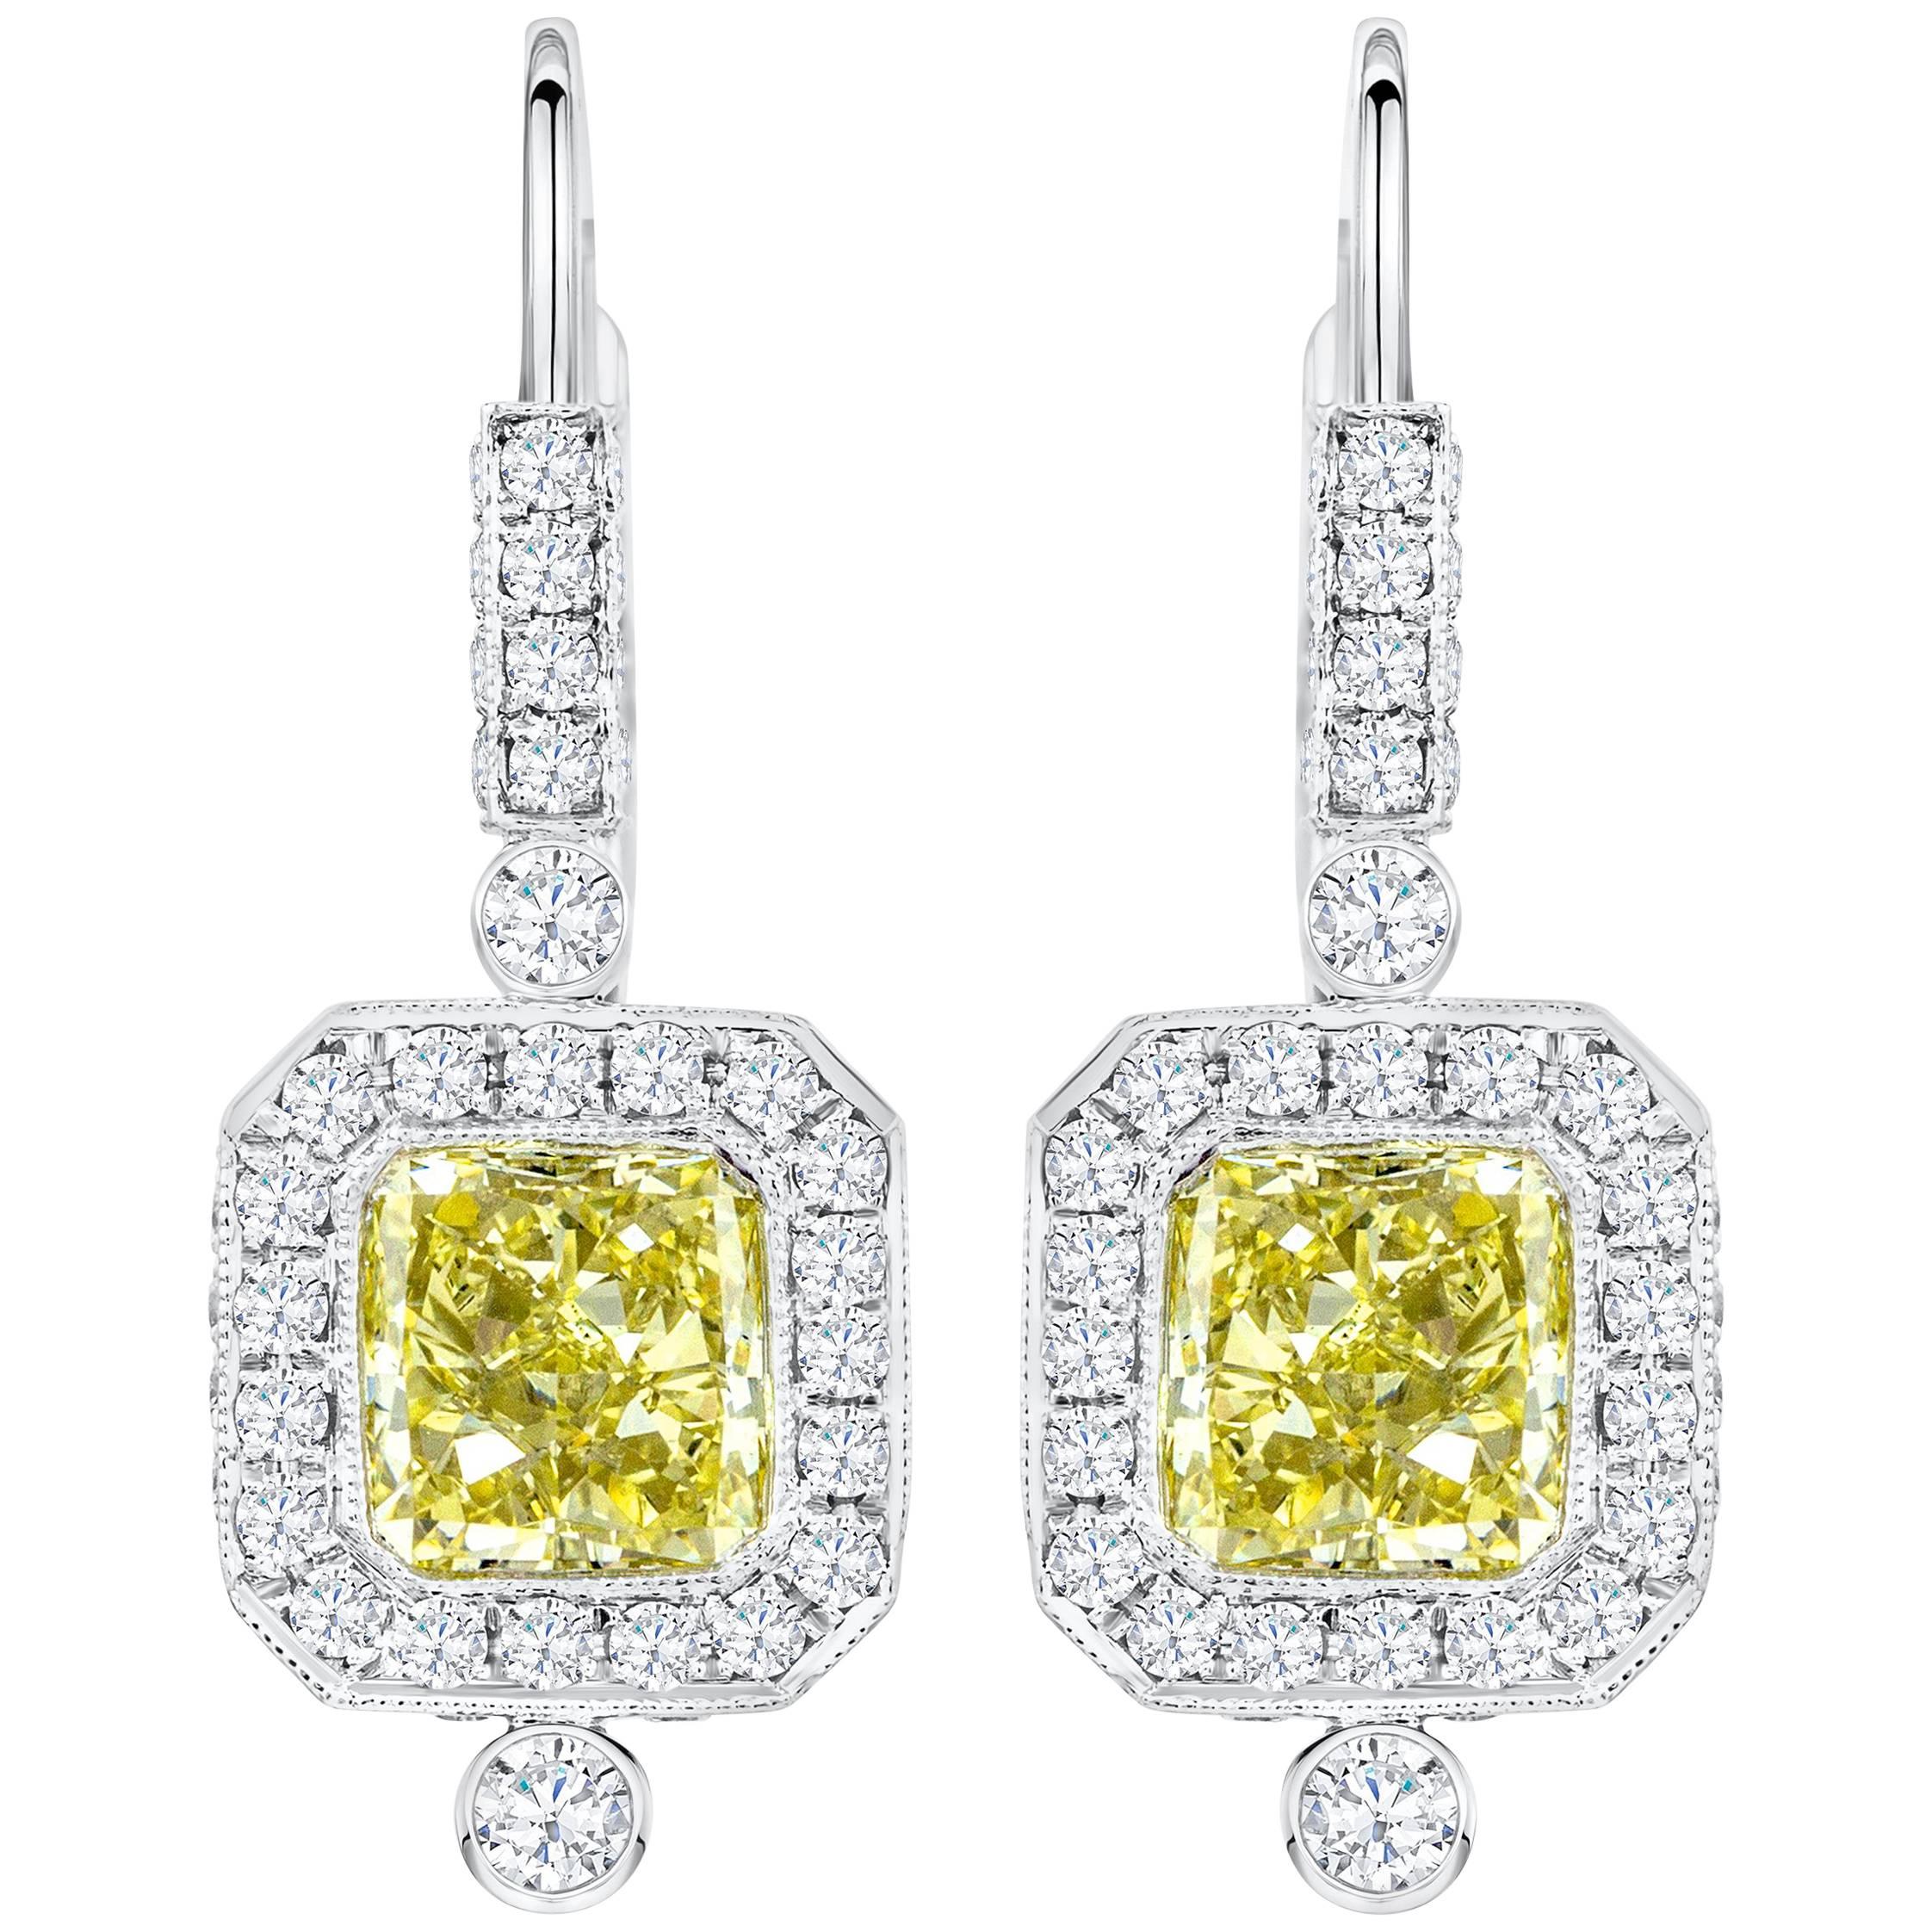 An antique style design dangle earrings showcasing two perfectly matched GIA Certified Radiant Cut diamonds weighing 3.04 carats total, VS1-SI1 in Clarity. Surrounded by round diamond in a halo design, Made in Platinum

Roman Malakov is a custom